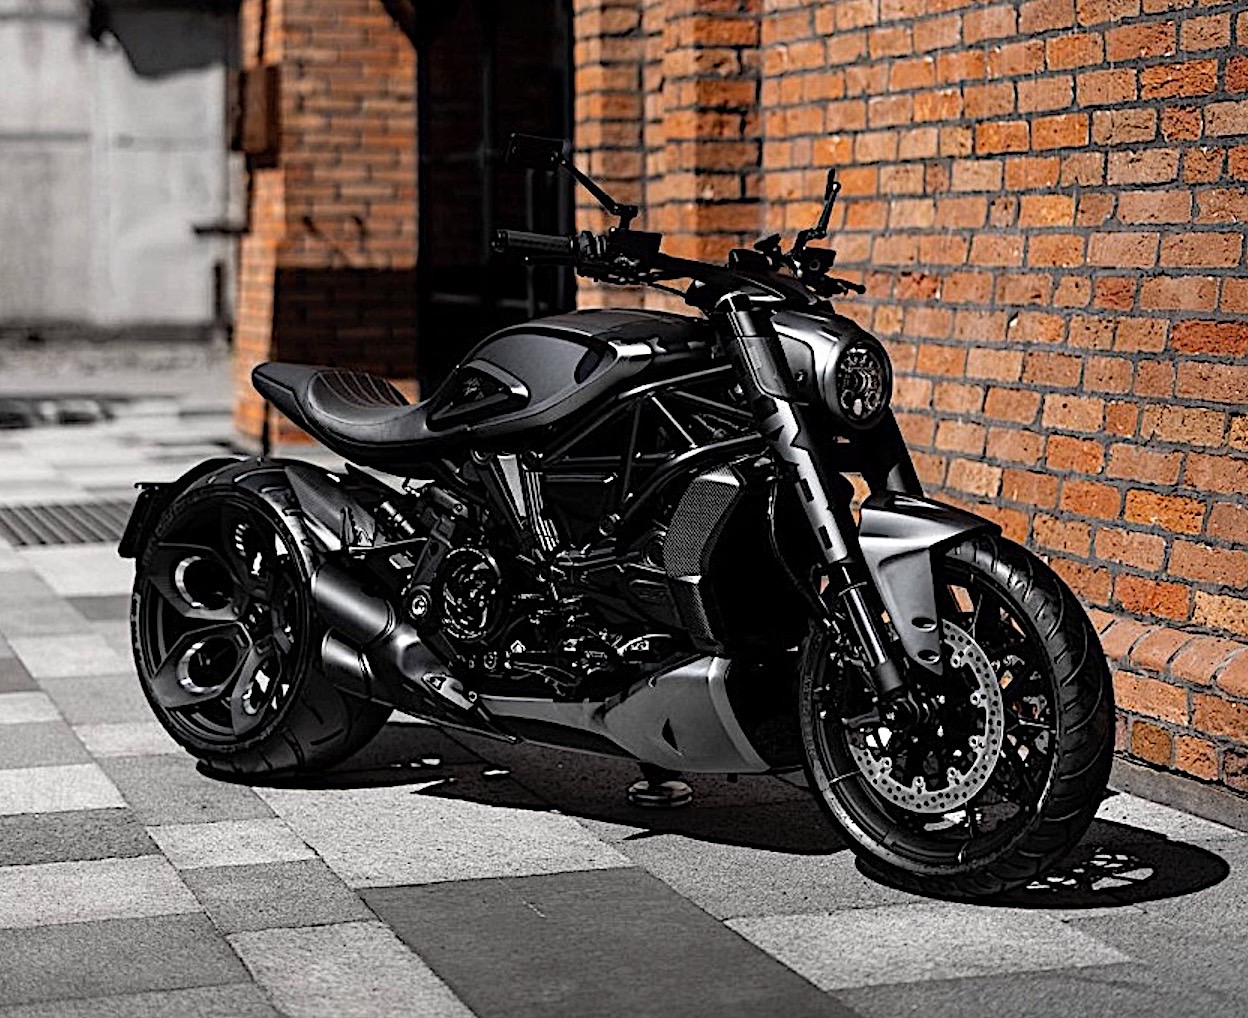 https://s1.cdn.autoevolution.com/images/news/ducati-xdiavel-piombo-x-is-hardcore-as-only-a-russian-harley-davidson-can-be-220709_1.jpg